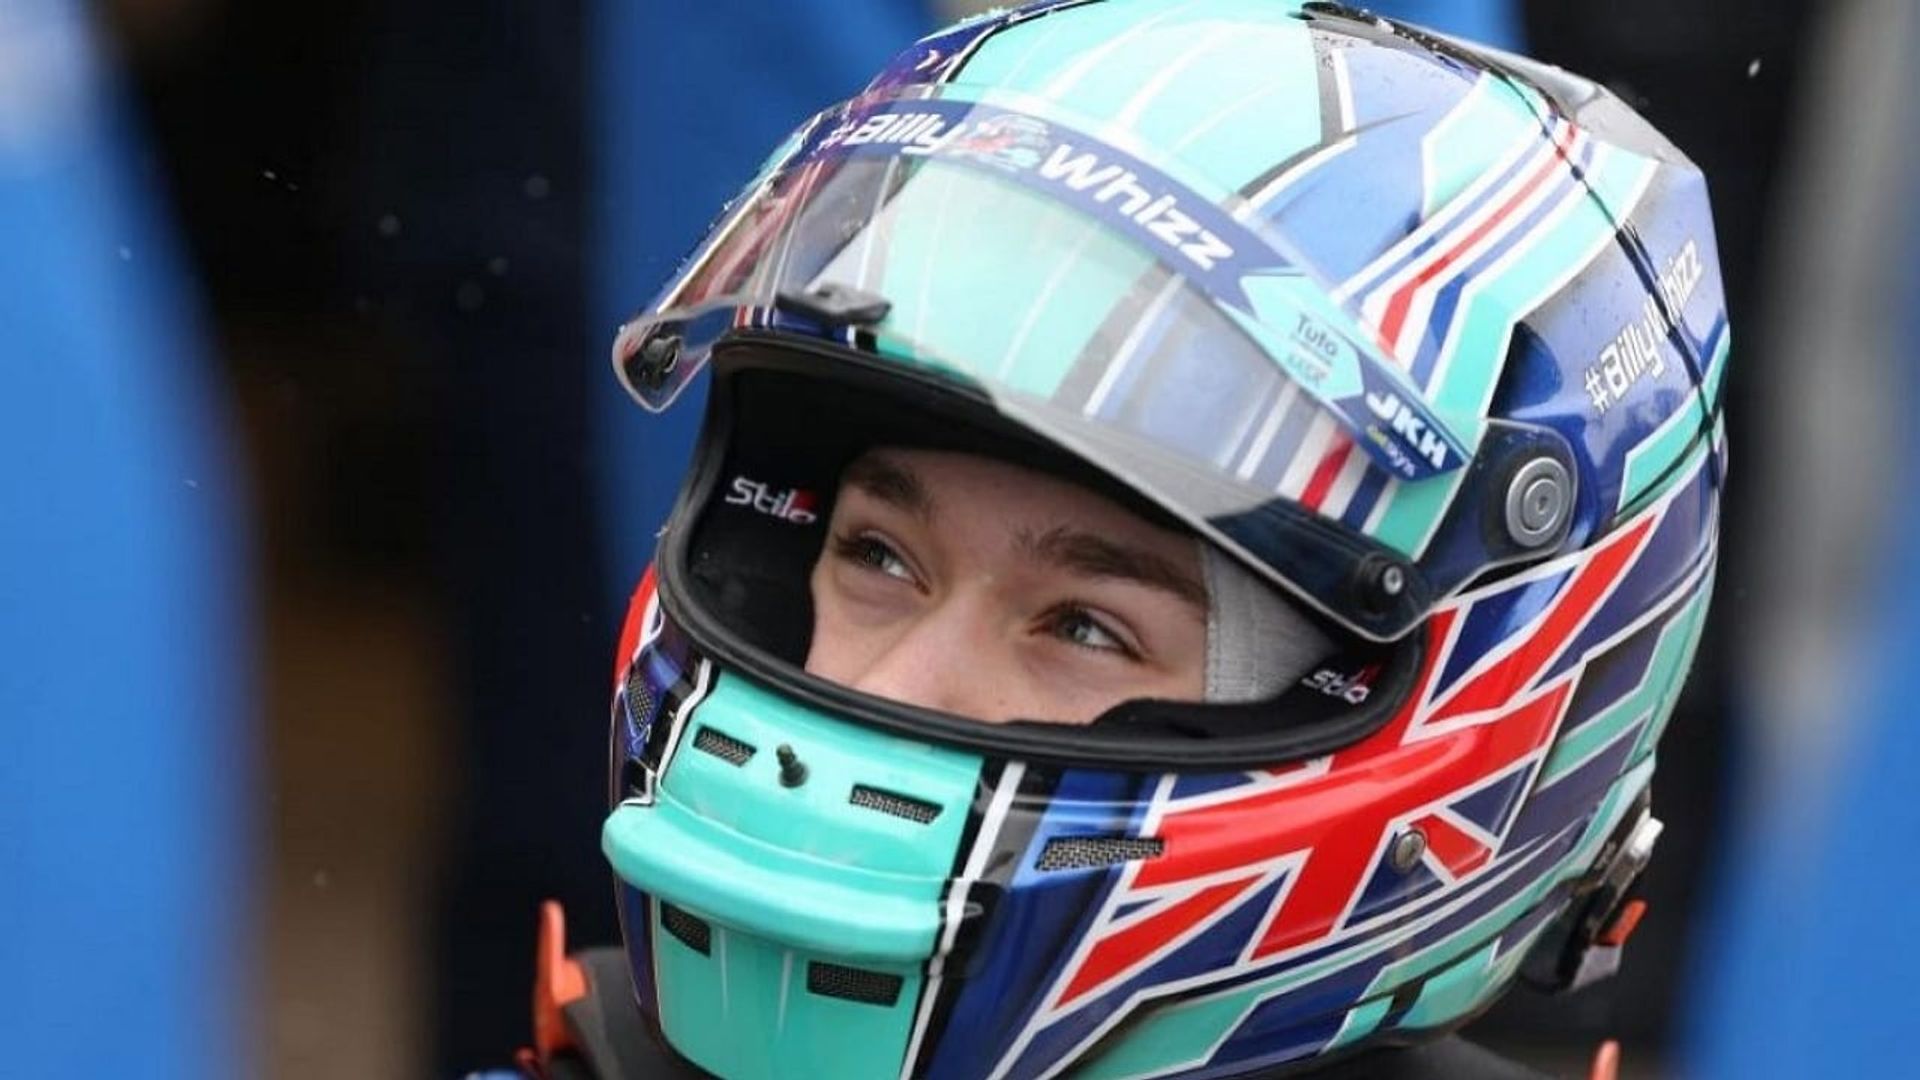 Driven: The Billy Monger Story background